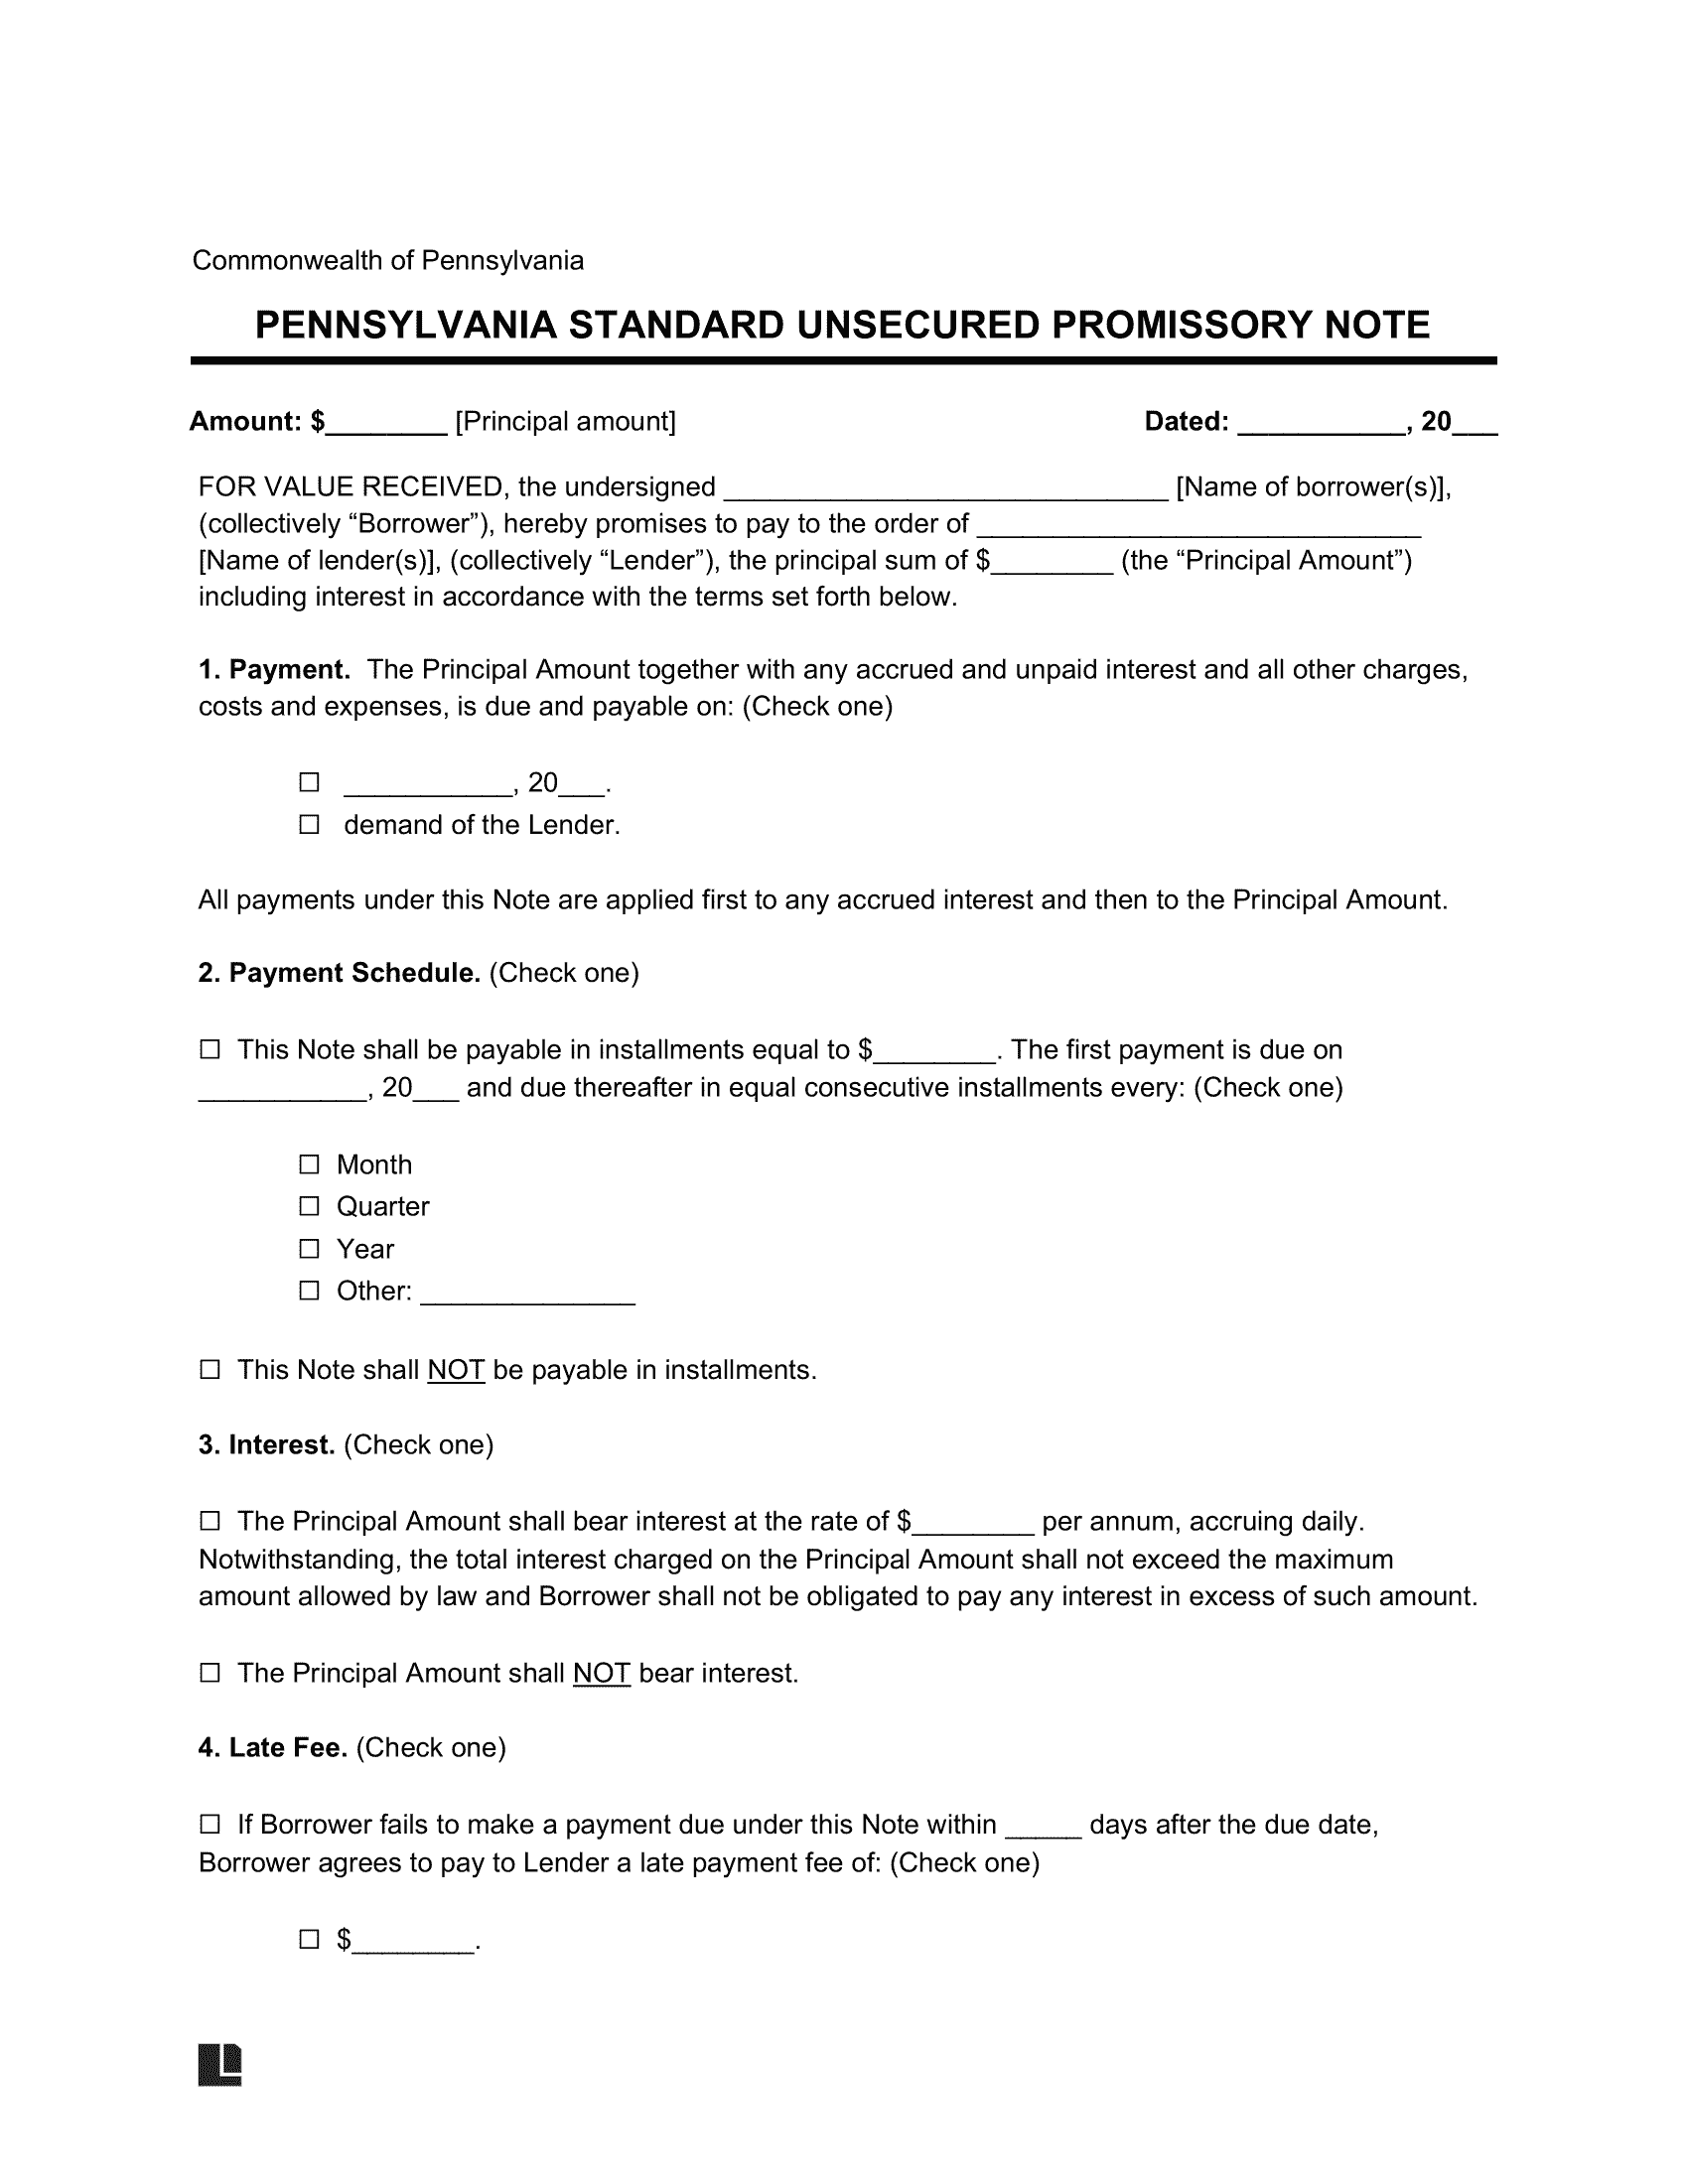 Pennsylvania Standard Unsecured Promissory Note Template